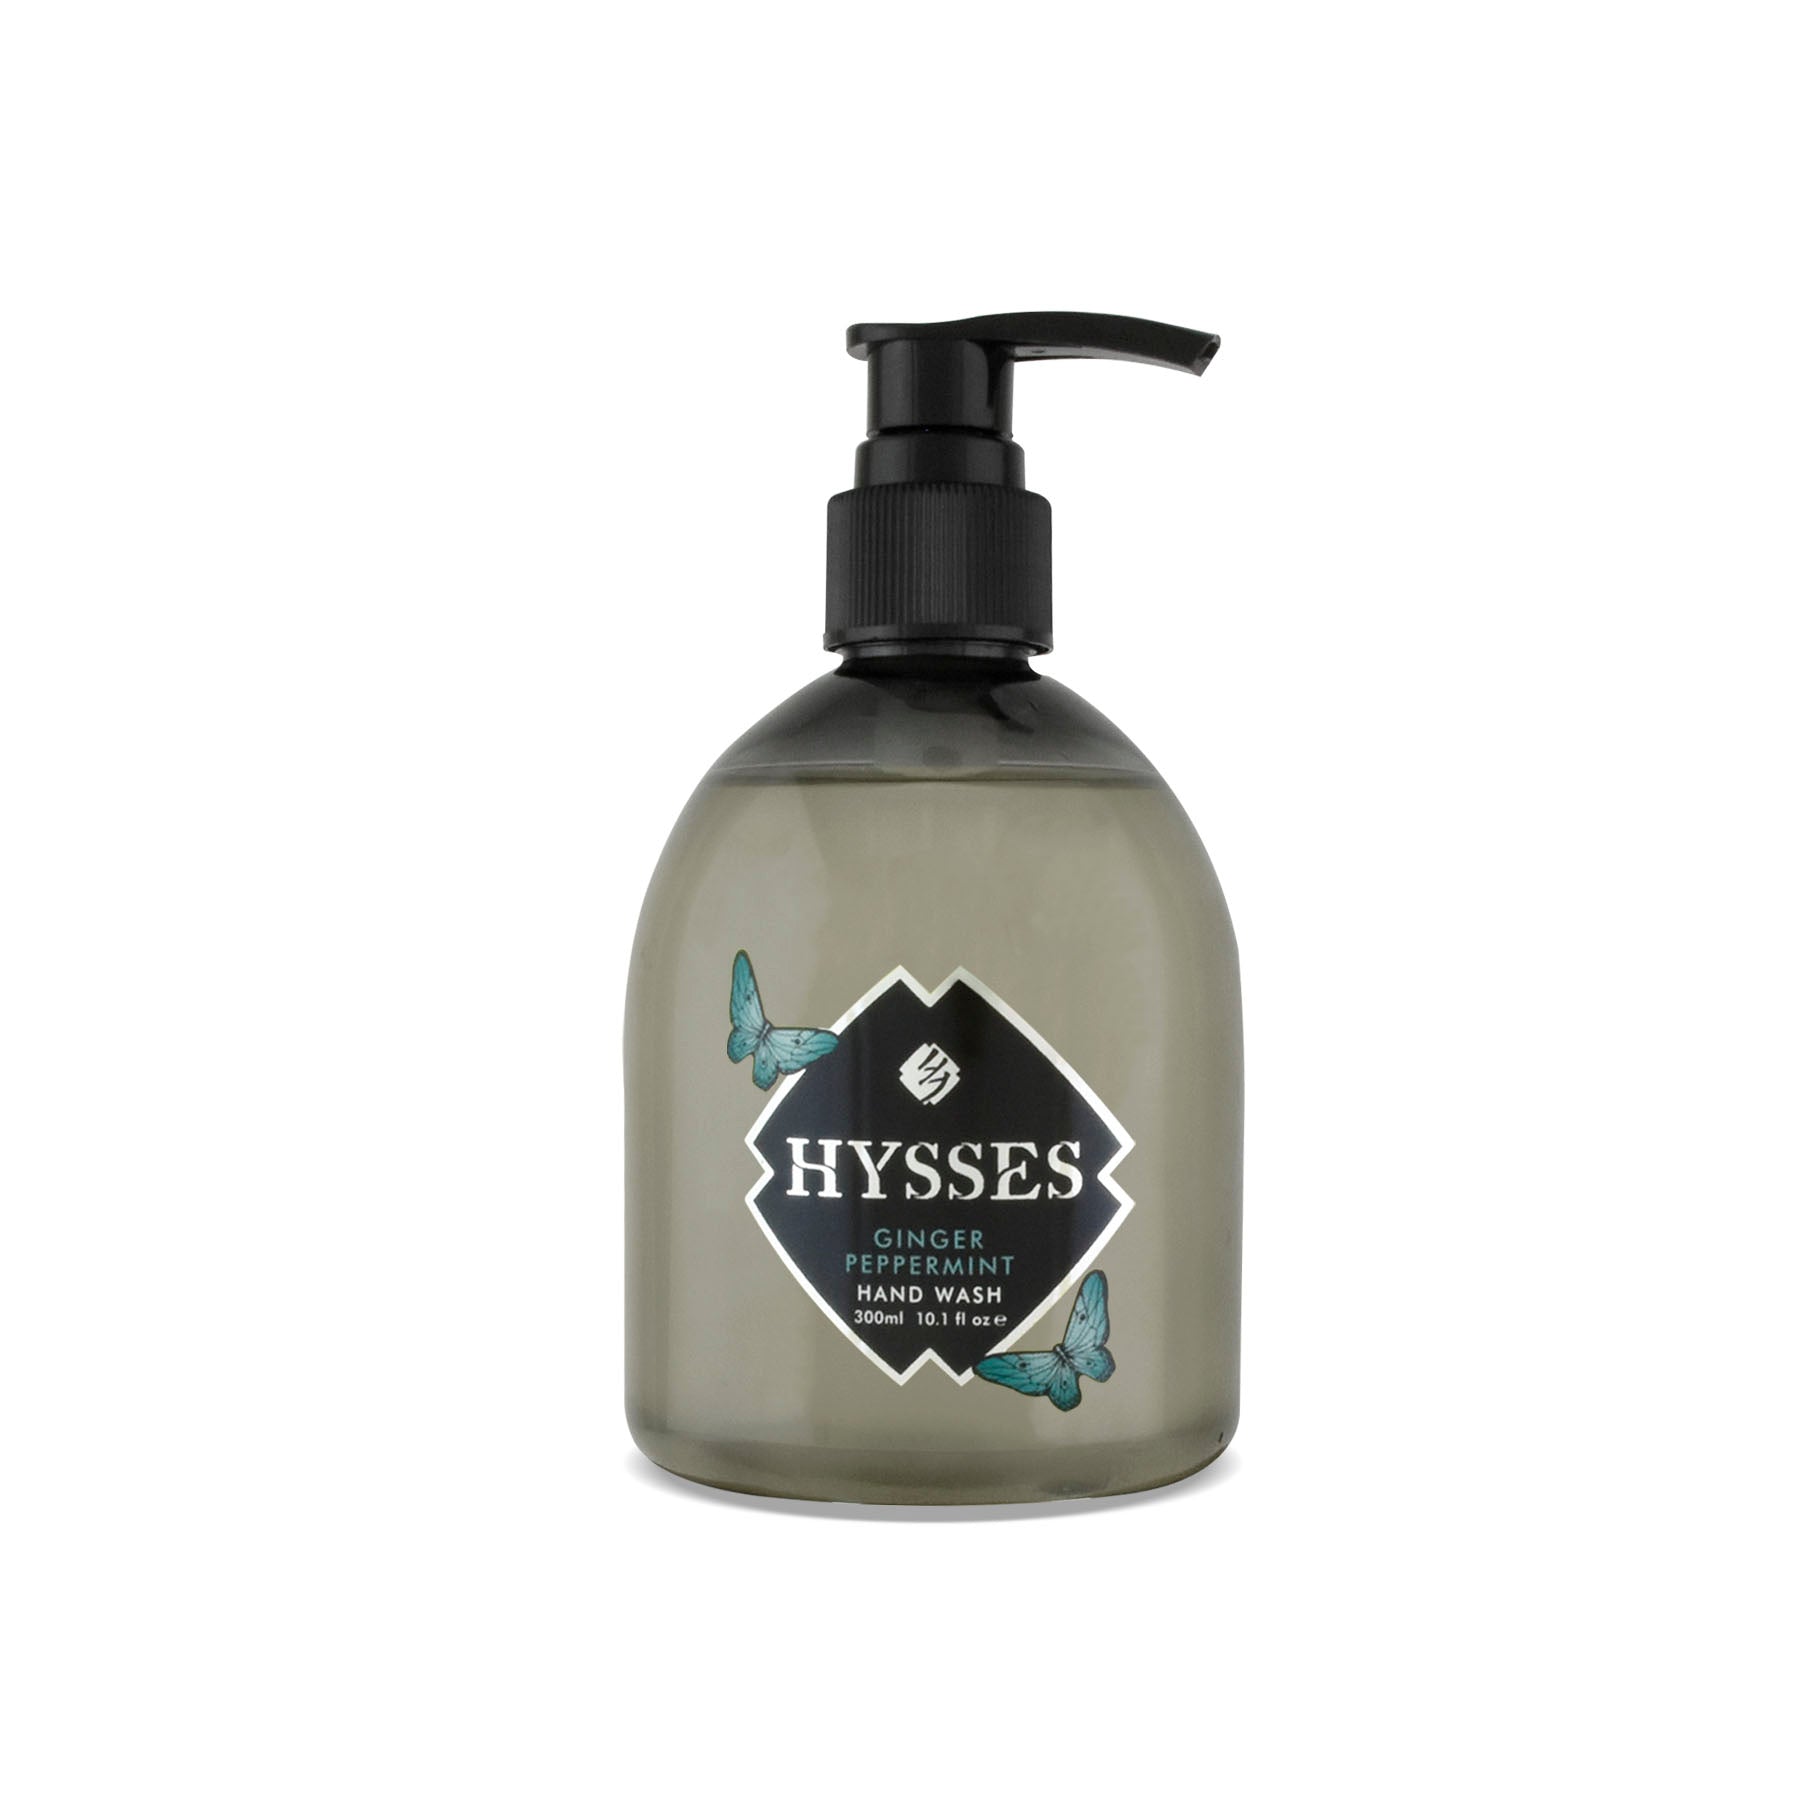 Hand Wash Ginger Peppermint - HYSSES